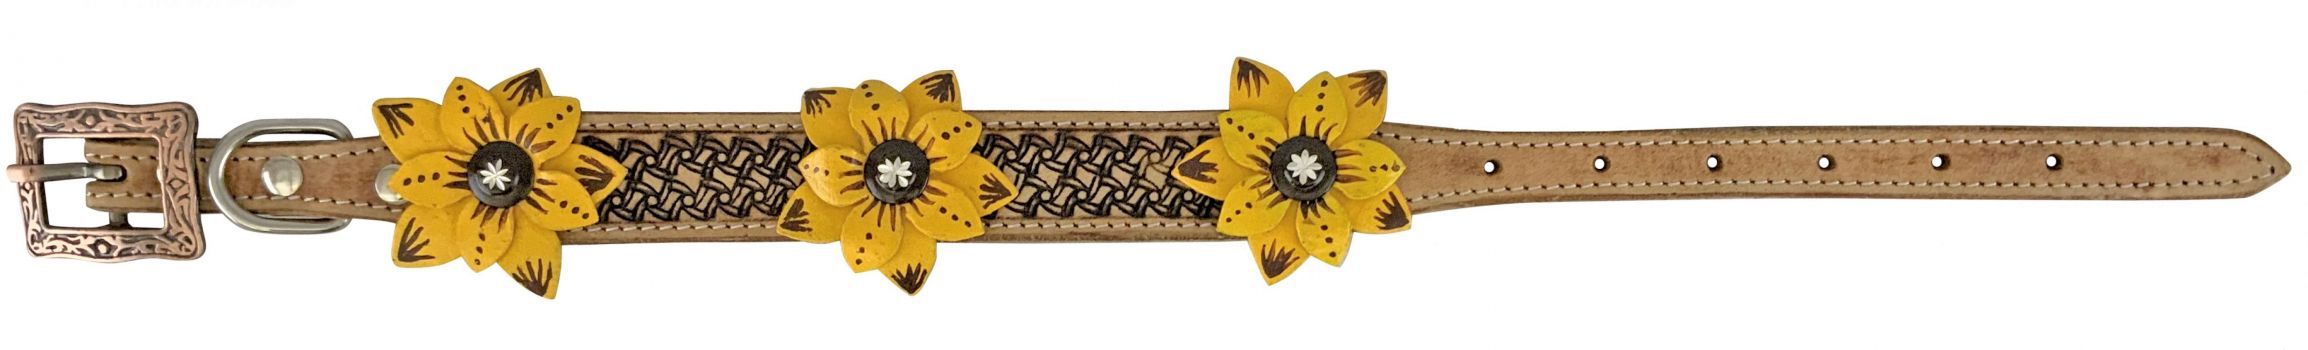 Showman Couture Genuine leather dog collar with 3D flower accent